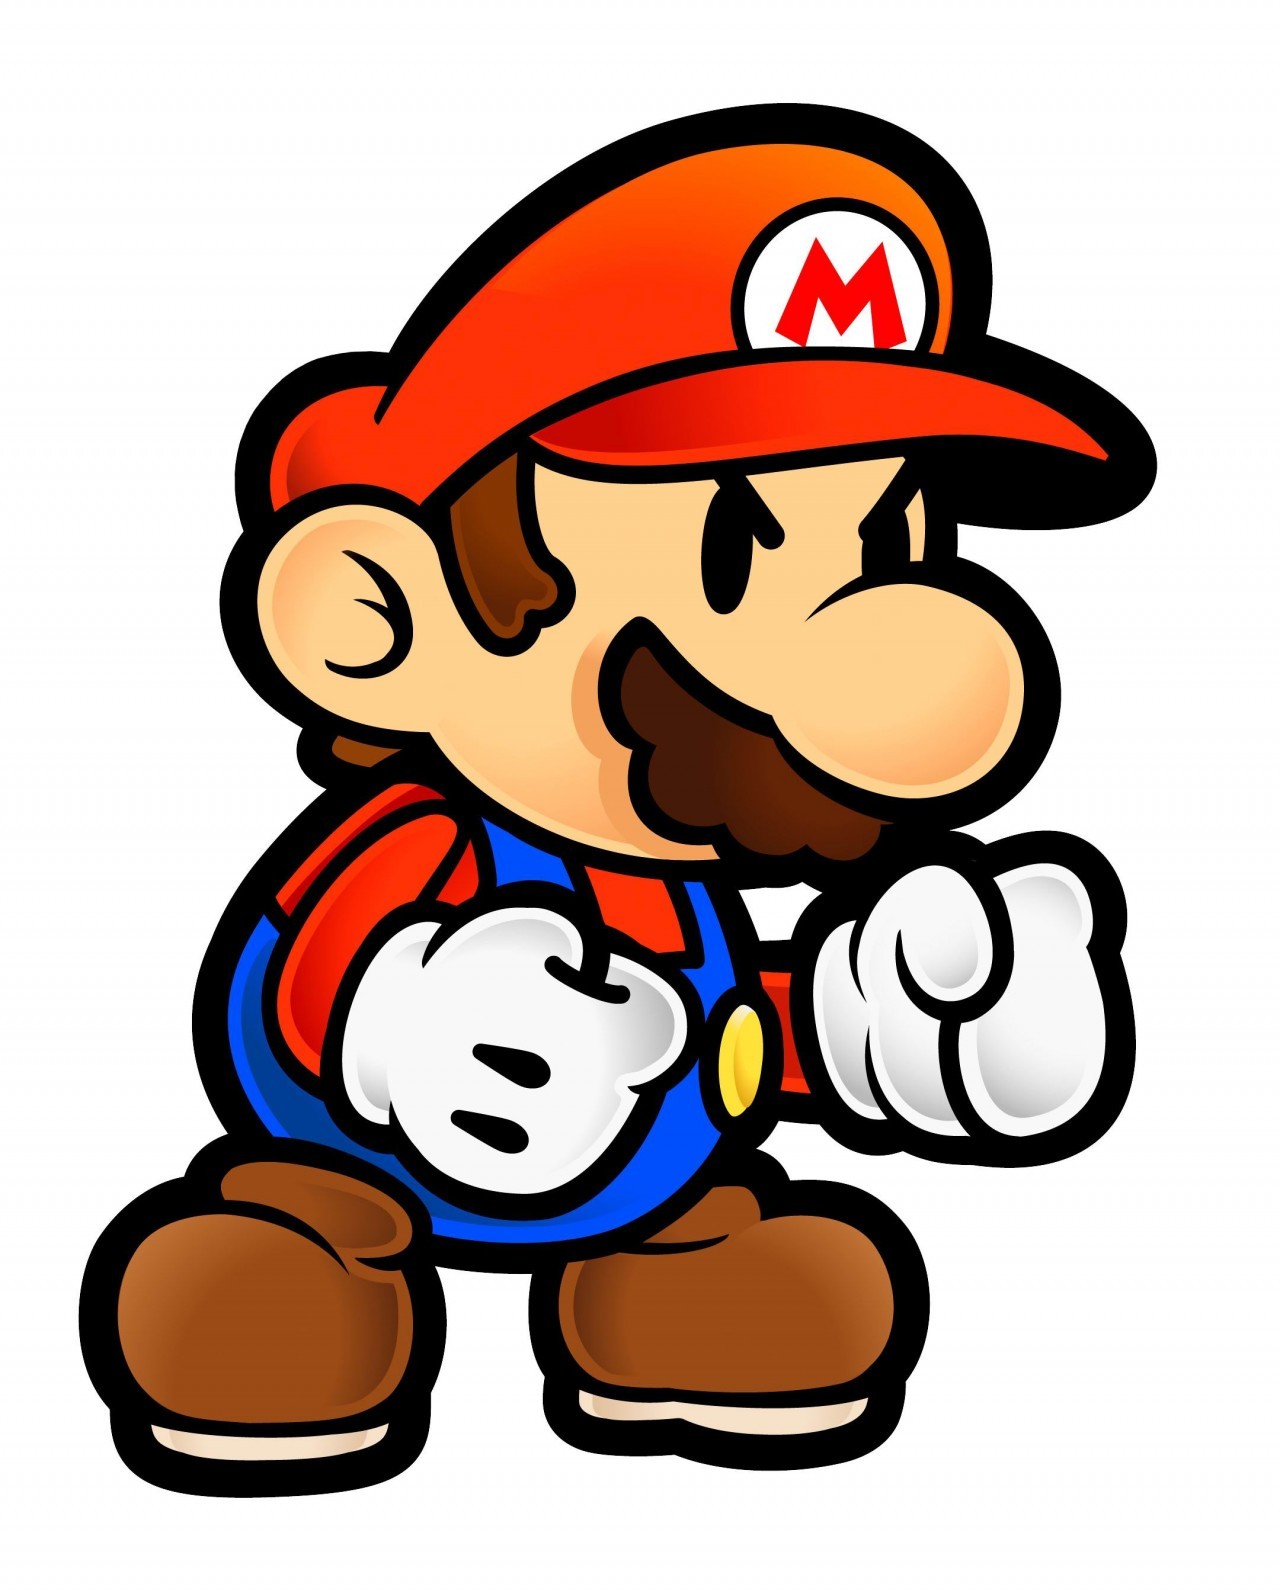 Amazing Paper Mario Pictures & Backgrounds. 